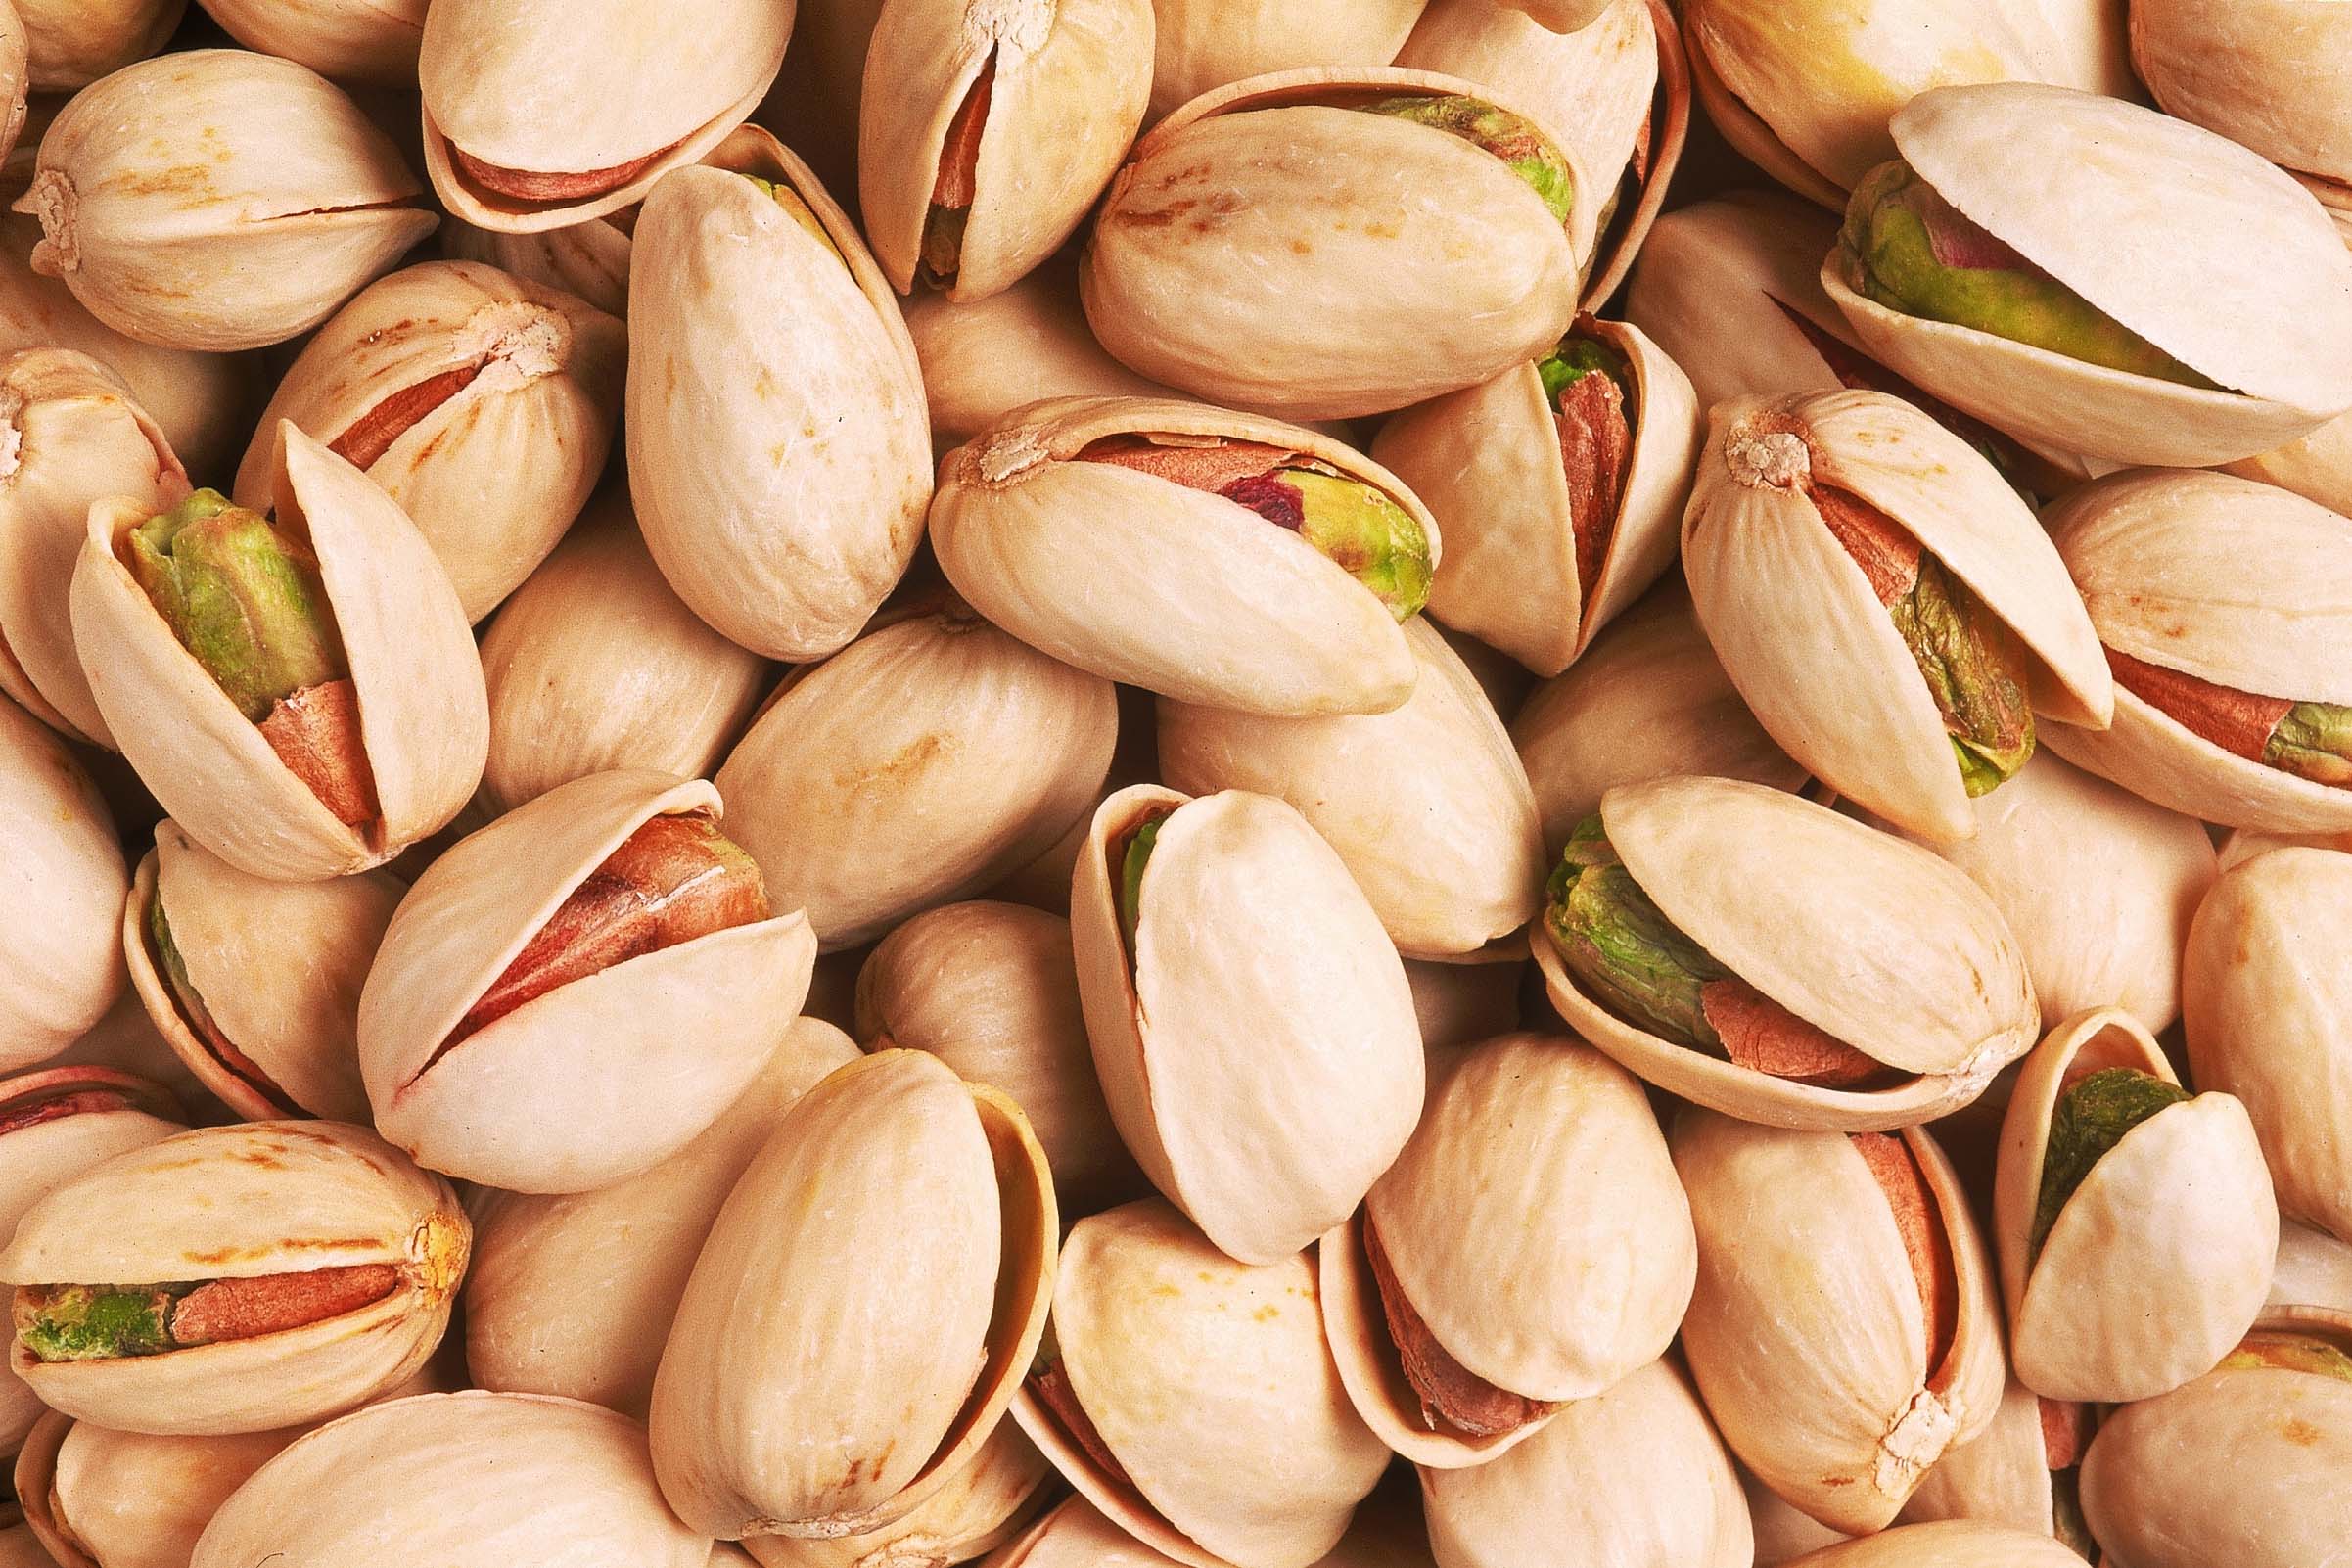 Best shelled pistachios unsalted + great purchase price